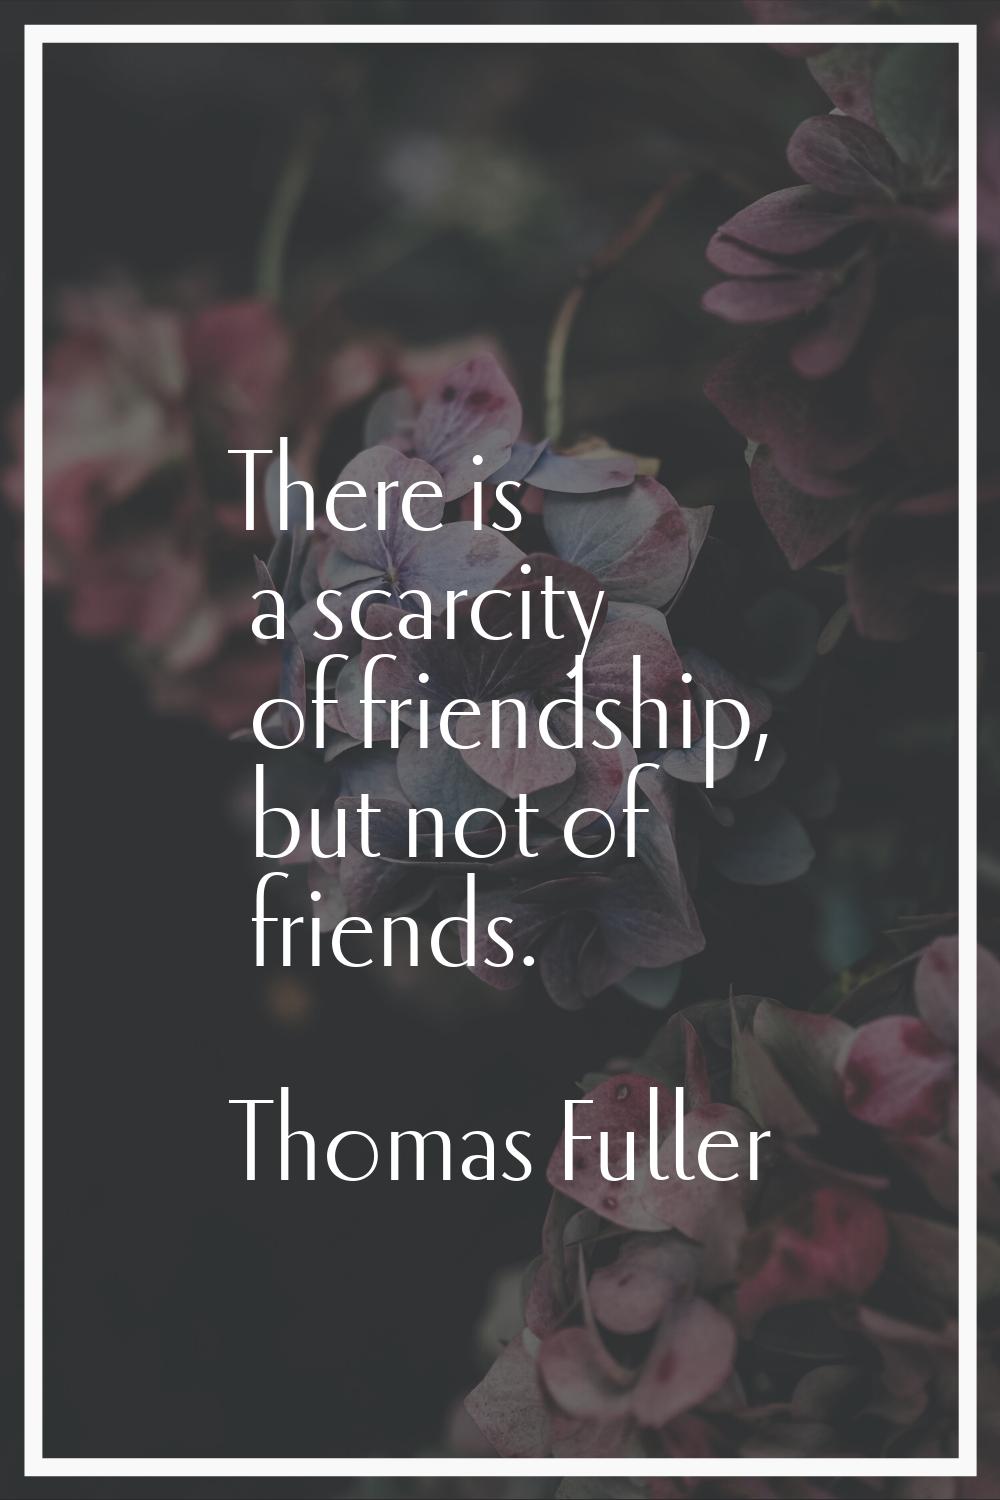 There is a scarcity of friendship, but not of friends.